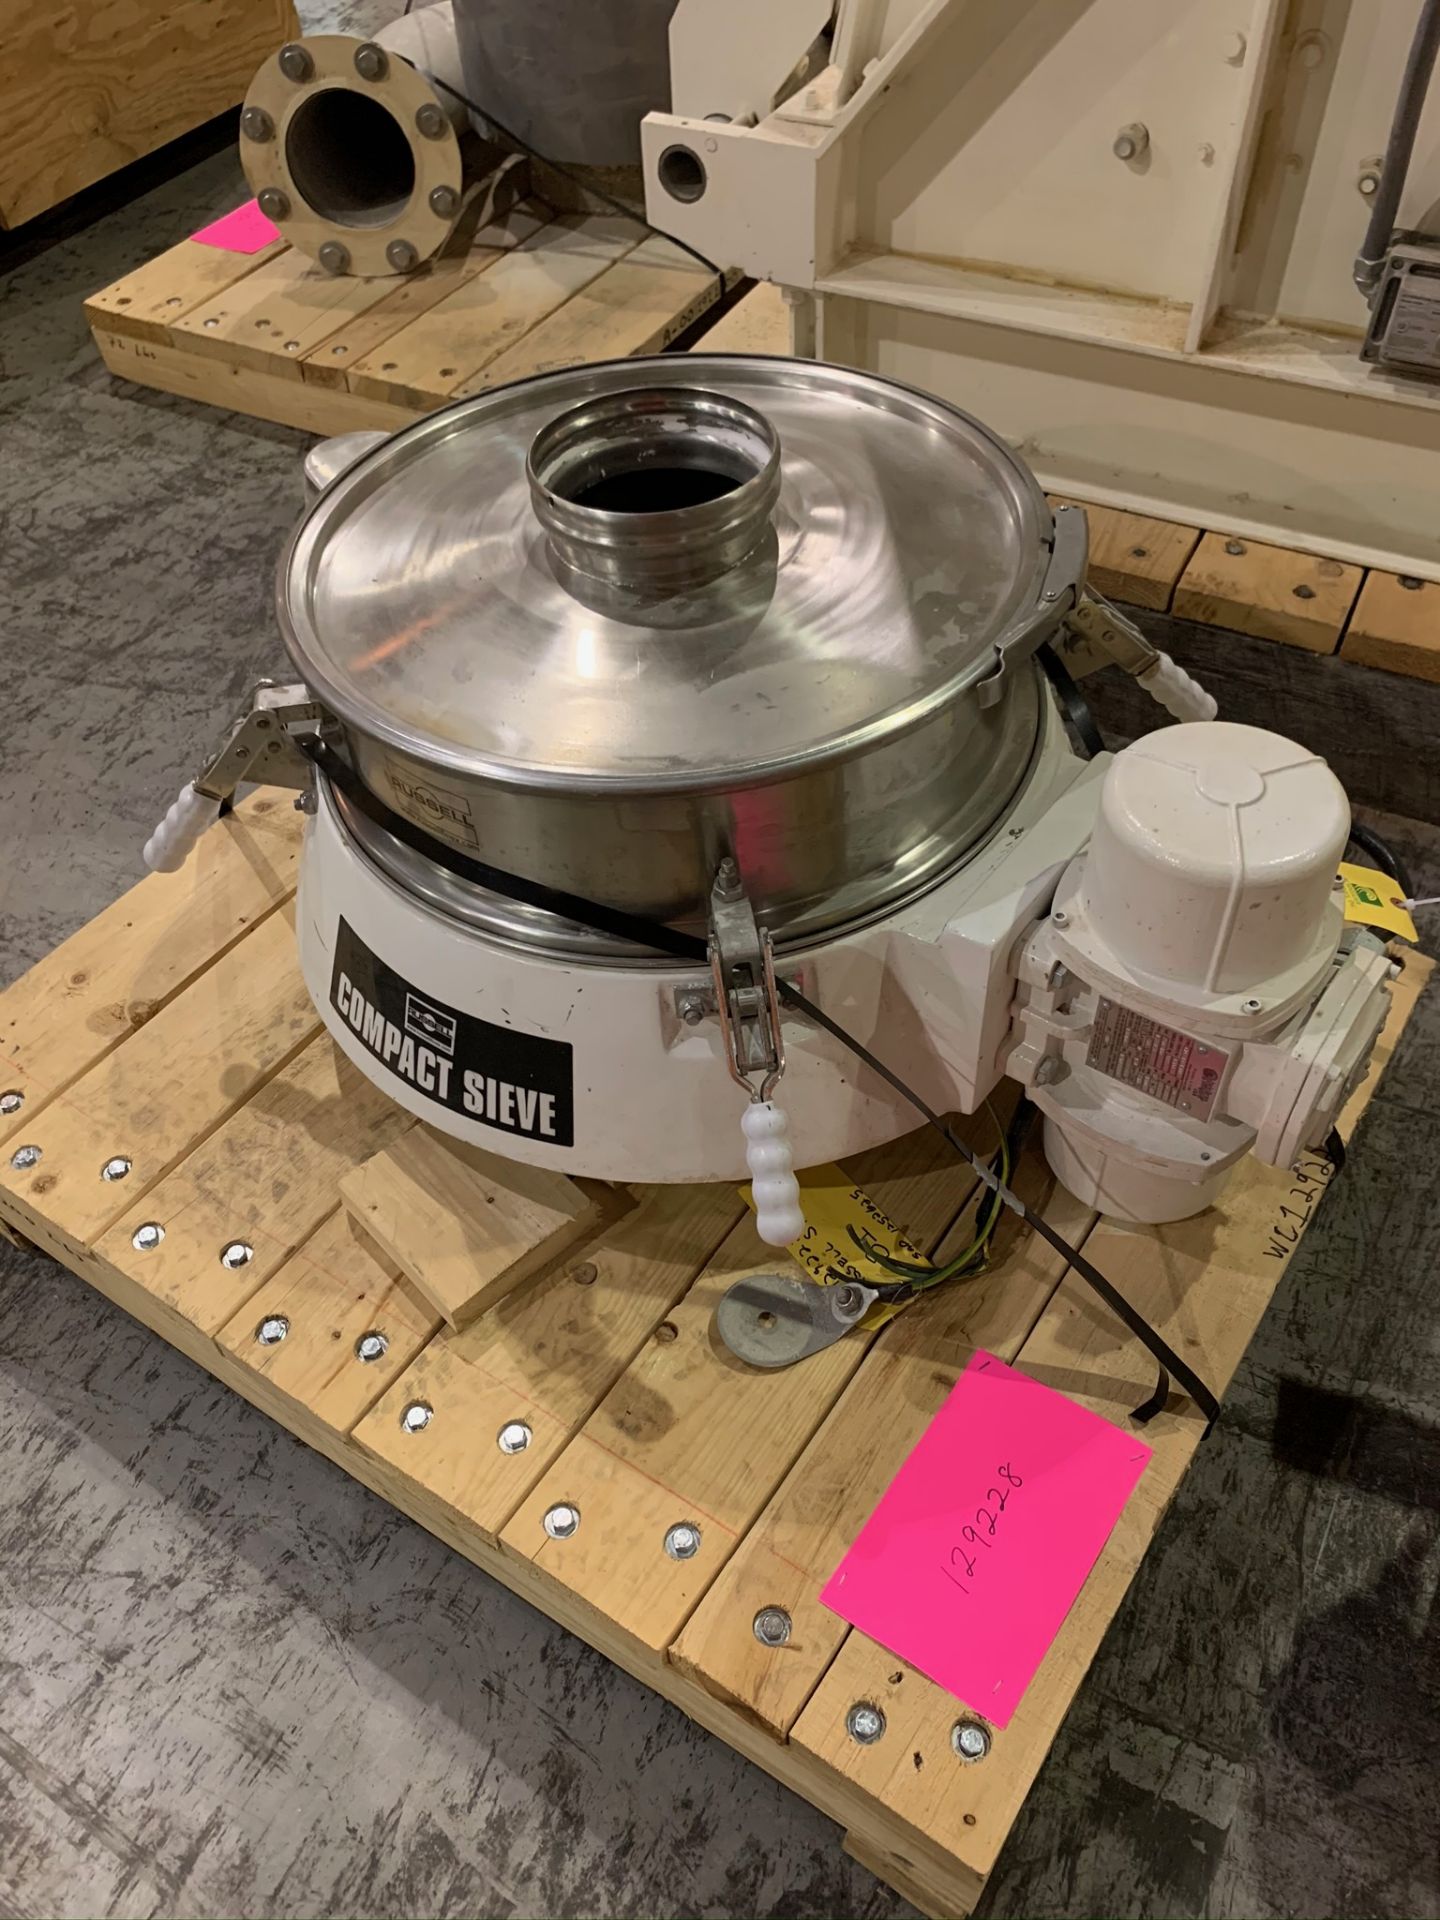 Russell Compact Sieve Model 17240 S/N DF3918 (Rigging Fee - $50)